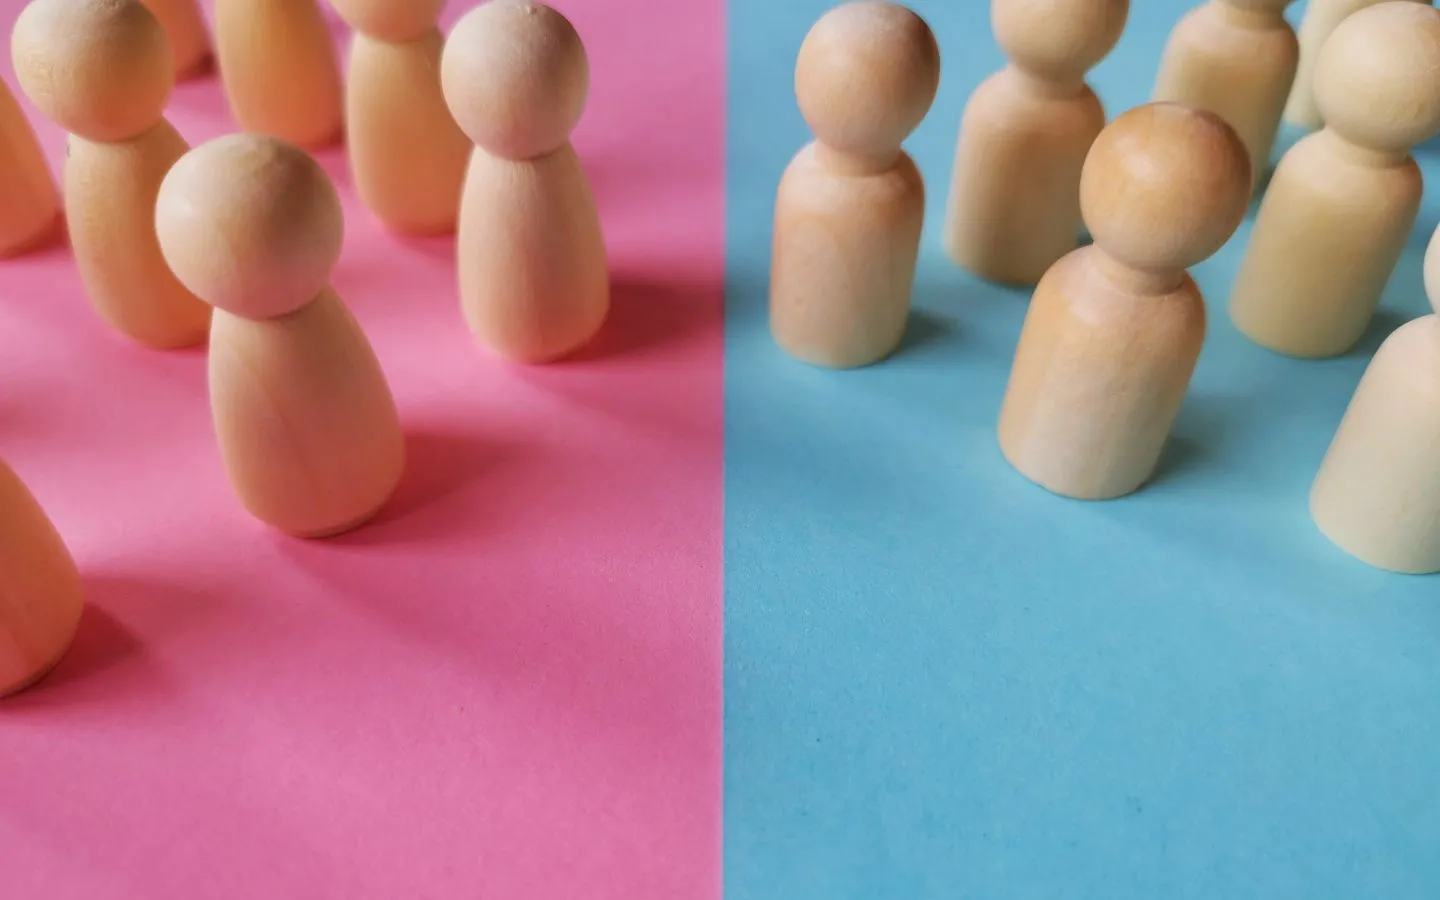 Wooden people on a vibrant blue and pink backdrop.